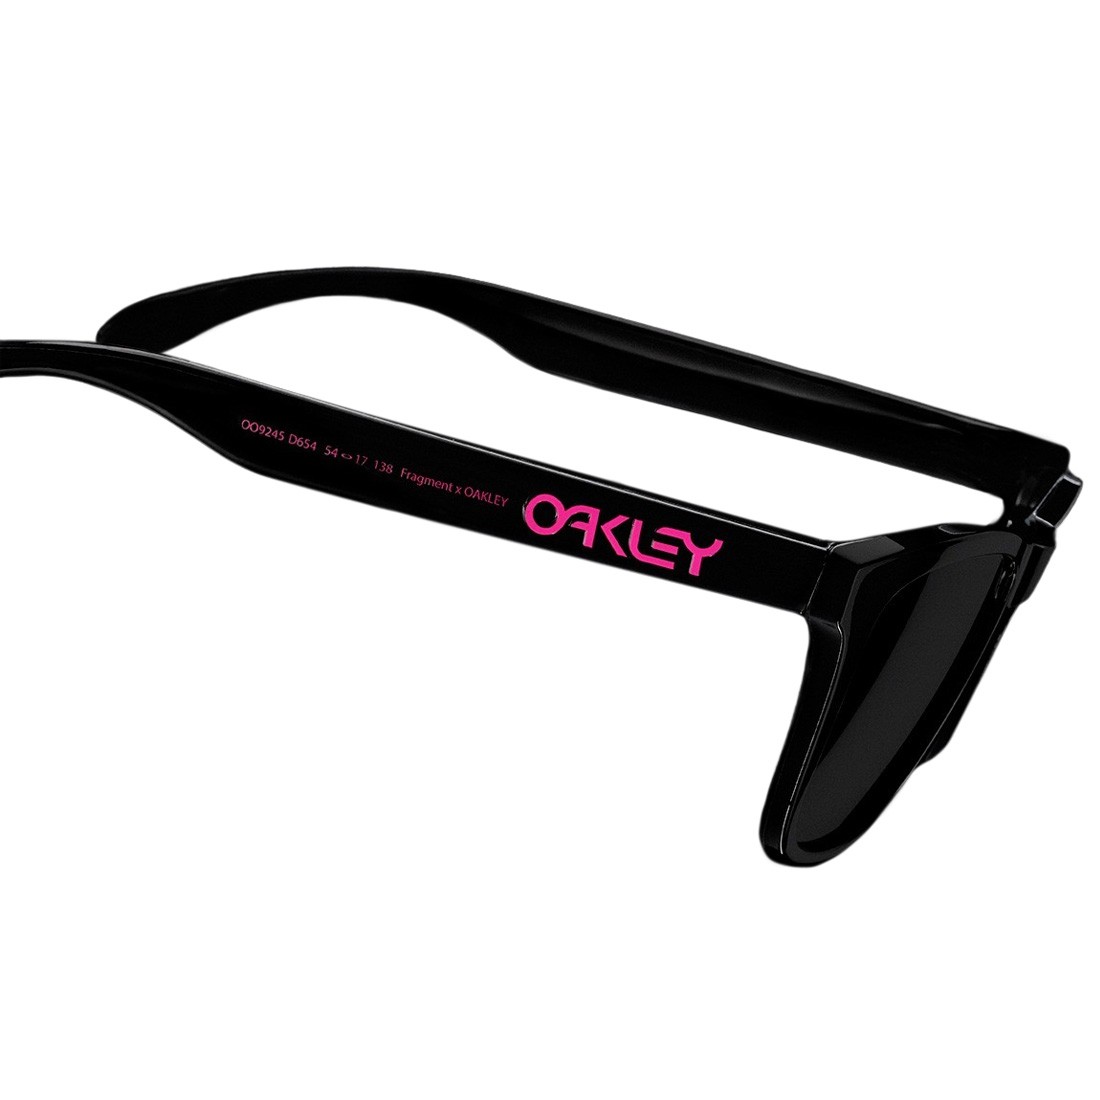 Stretched rectangle-frame sunglasses